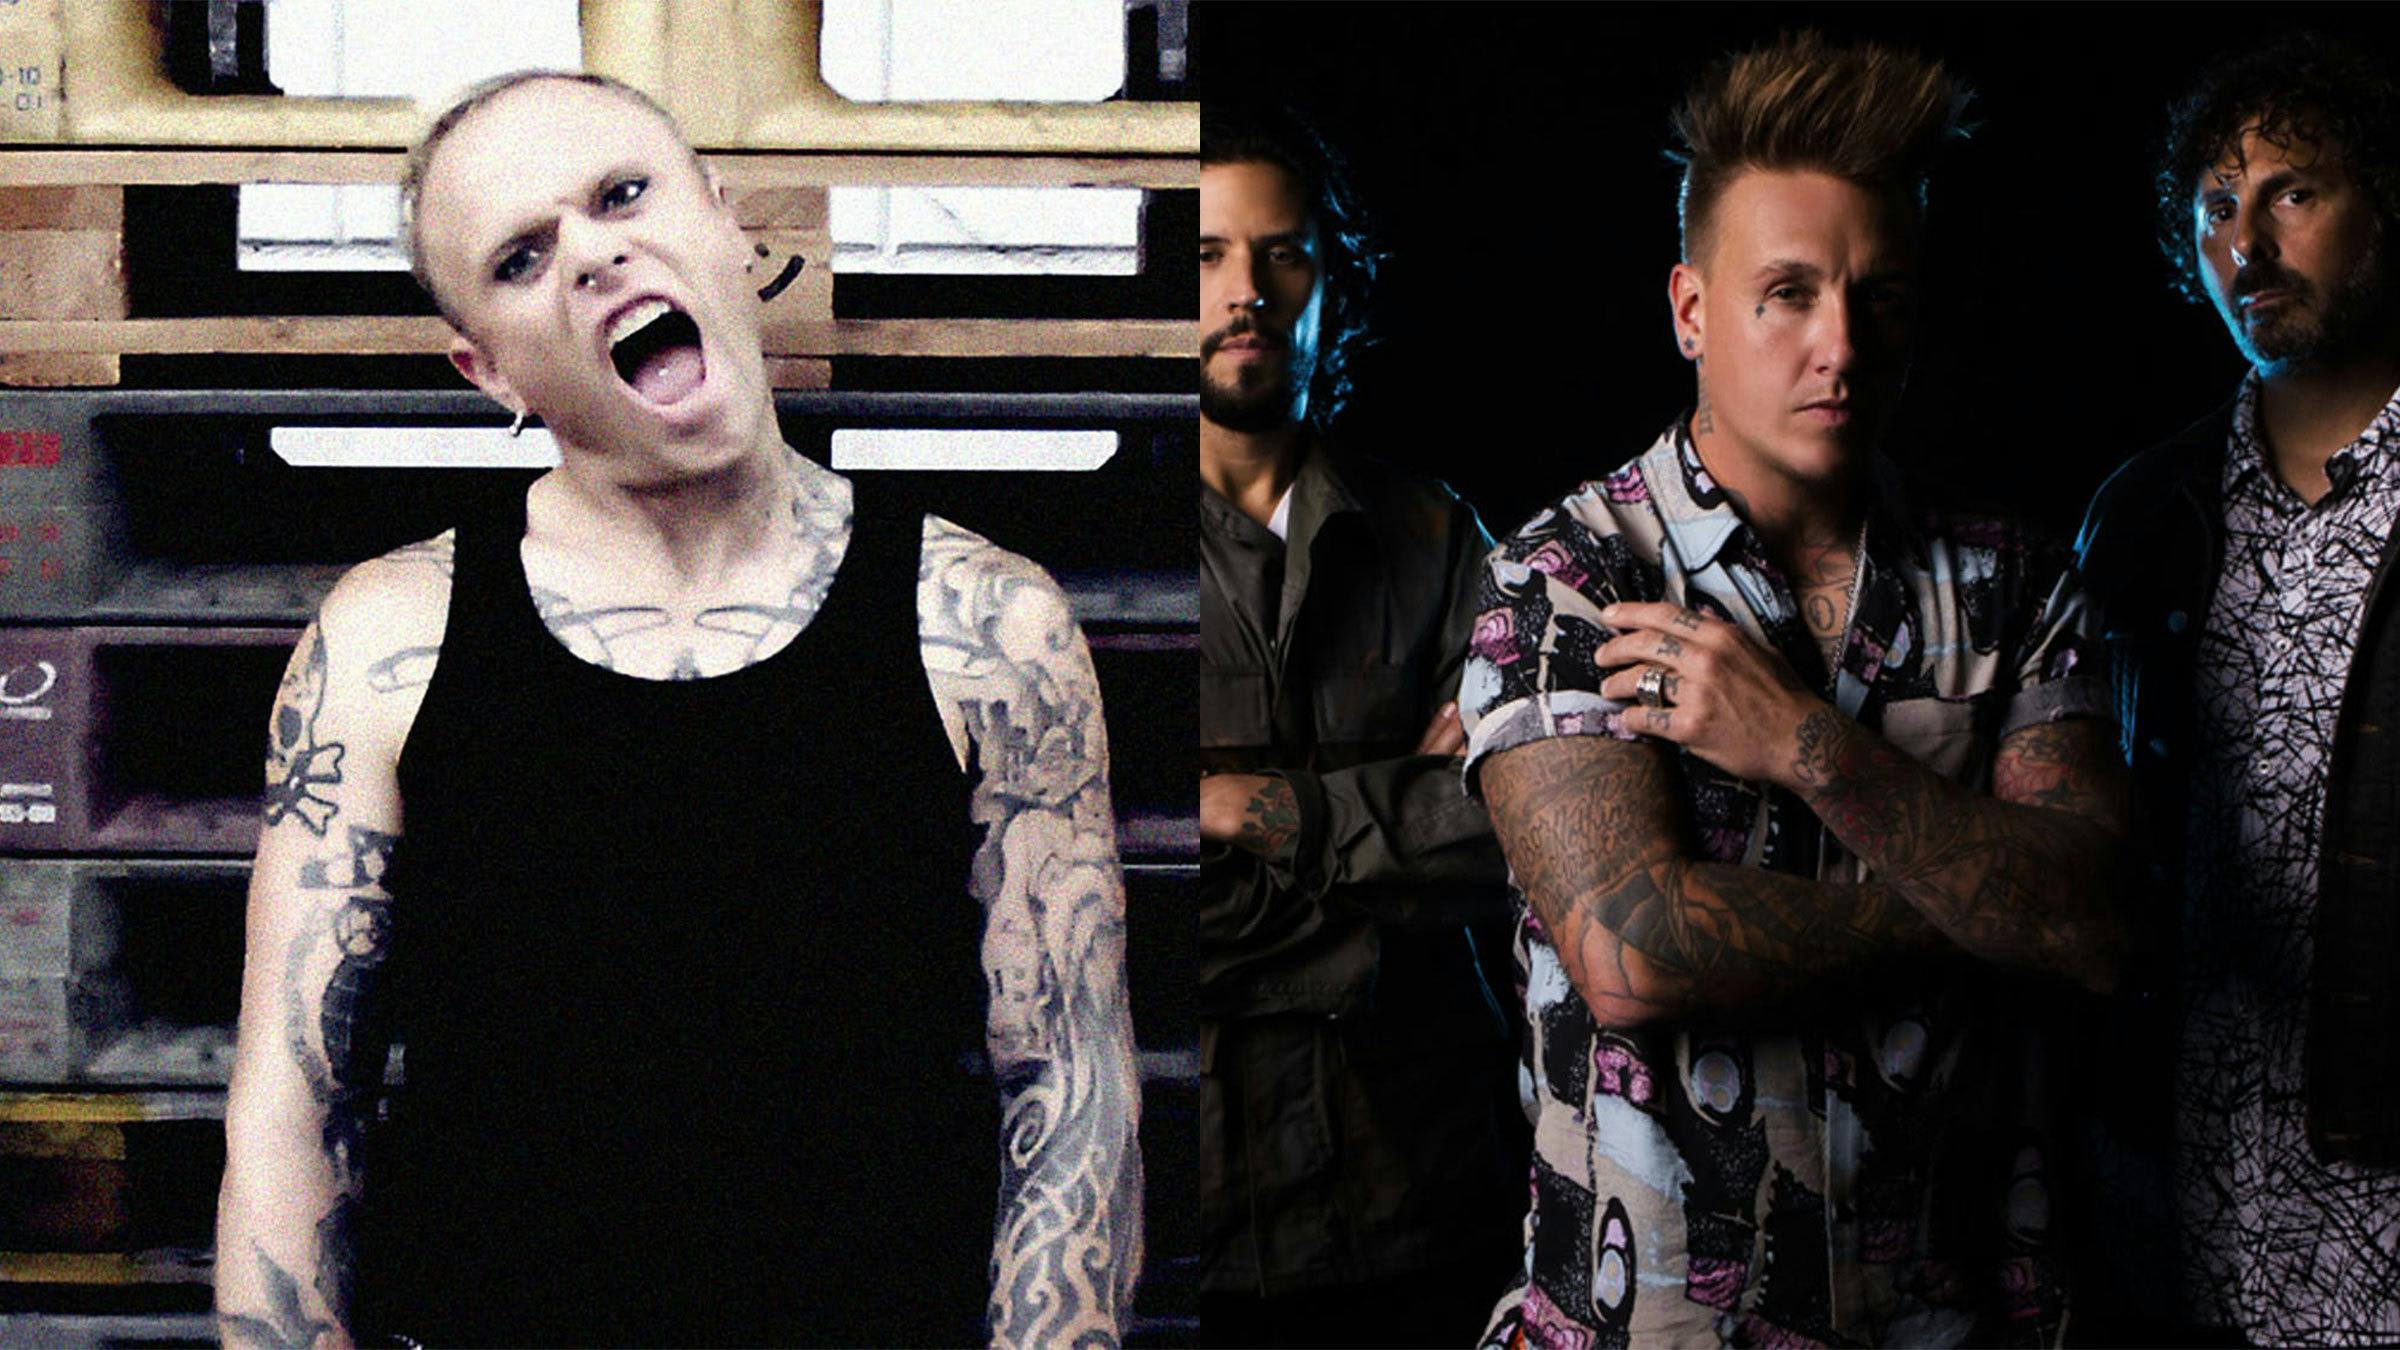 Watch Papa Roach Perform The Prodigy's Firestarter At Sonic Temple Art & Music Festival